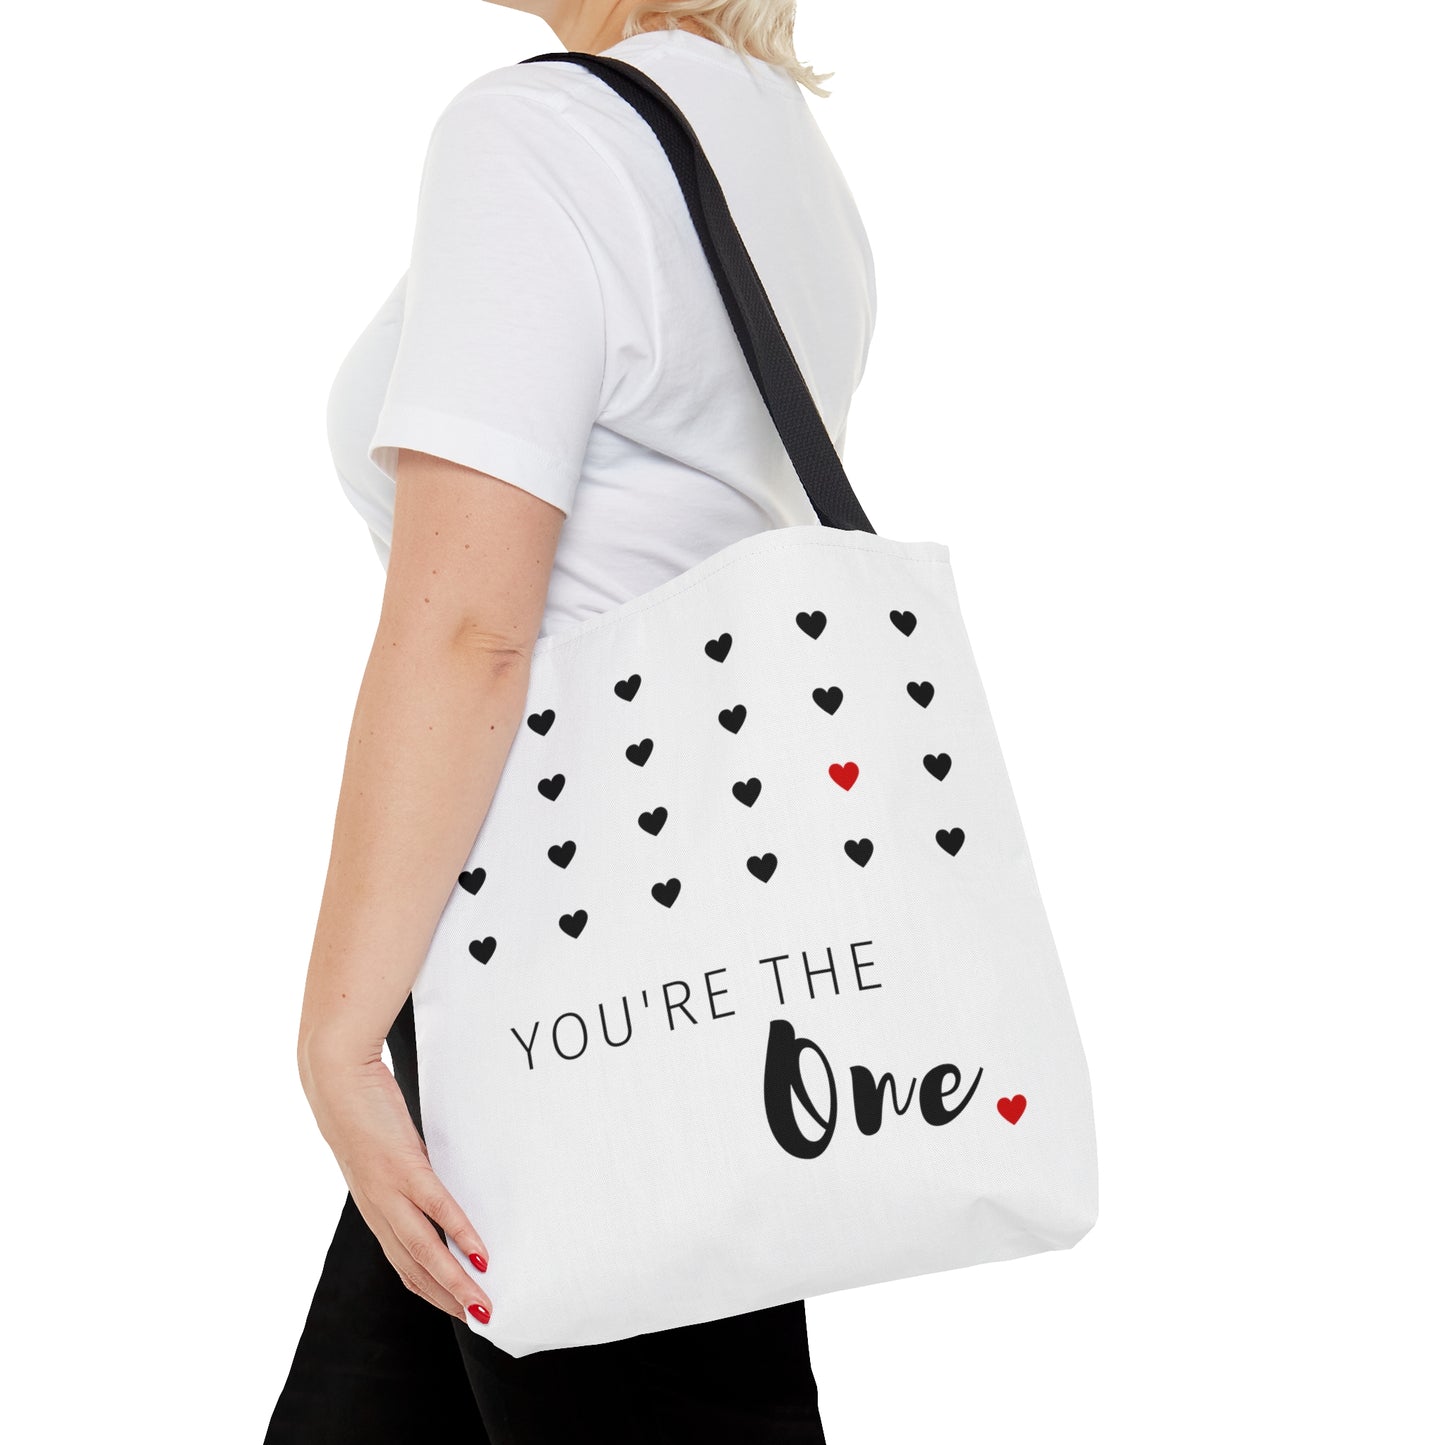 You are the one! with Heart Printed Tote Bag, Valentine Tote Bag